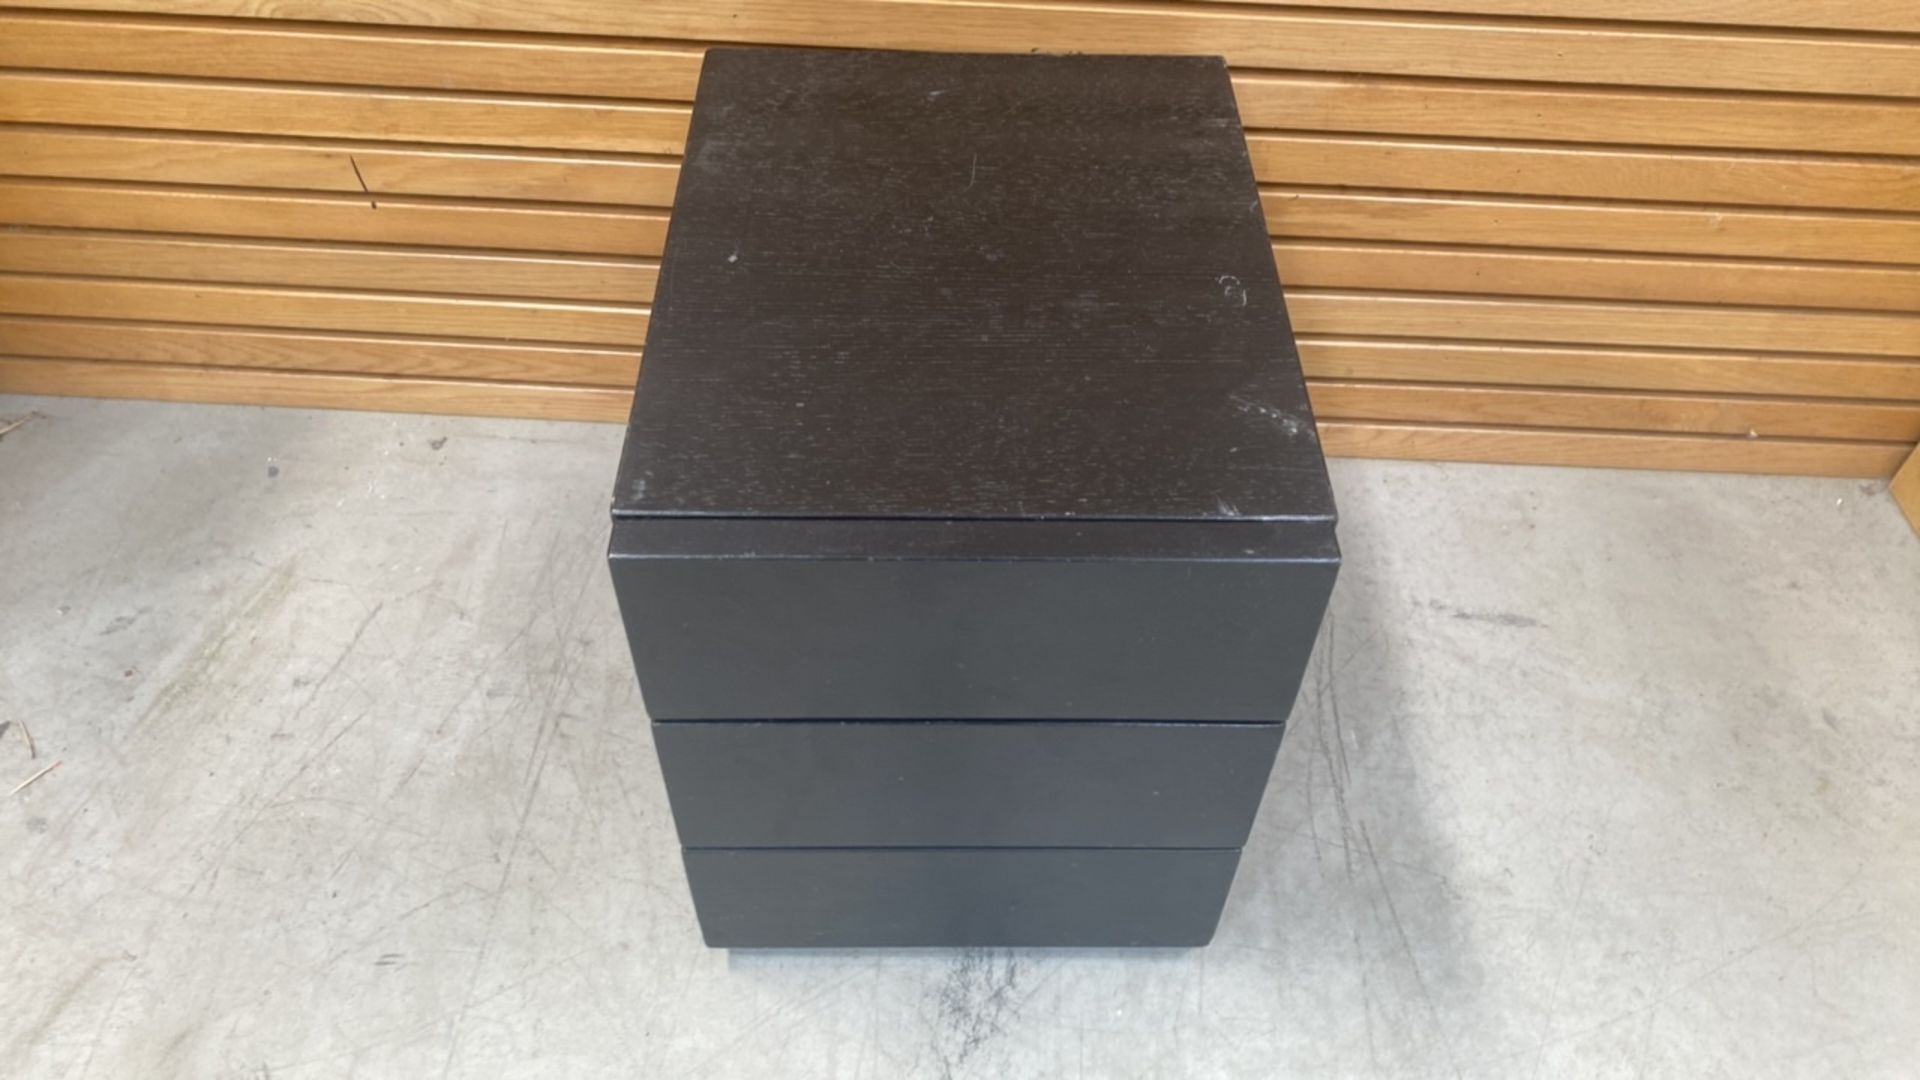 Black Wooden Side Table With 2 Draws - Image 2 of 3